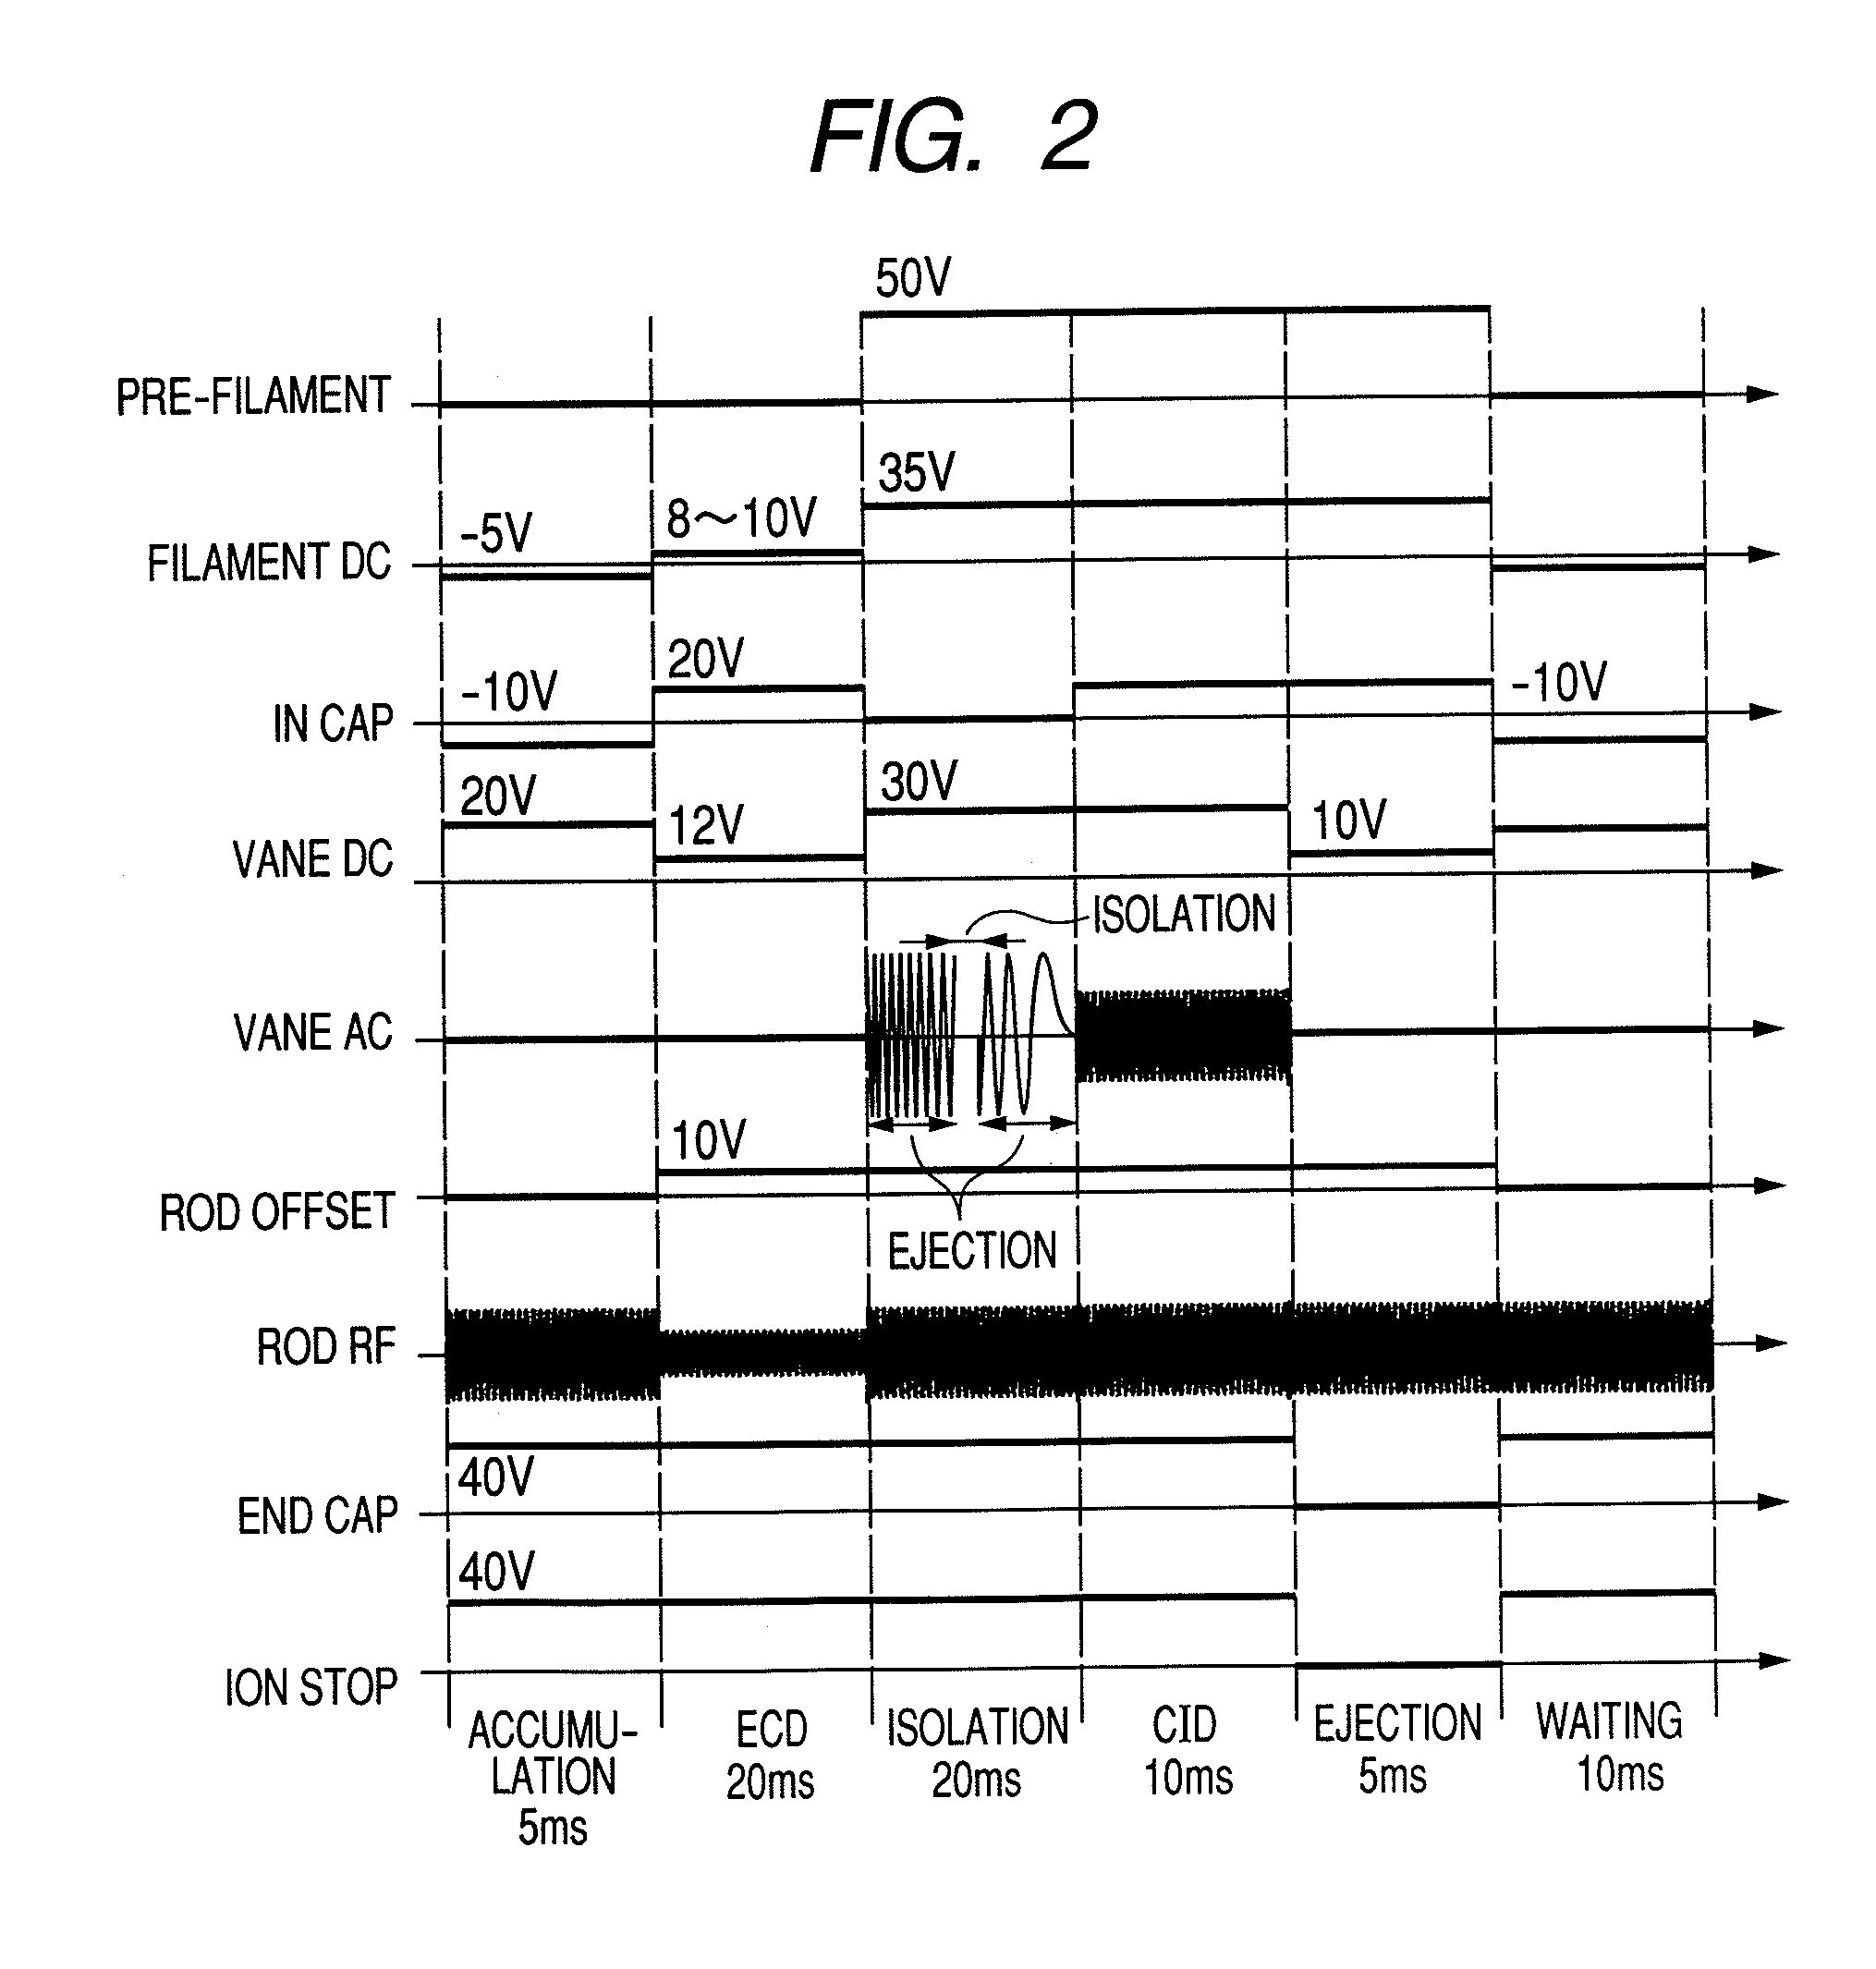 Reaction cell and mass spectrometer